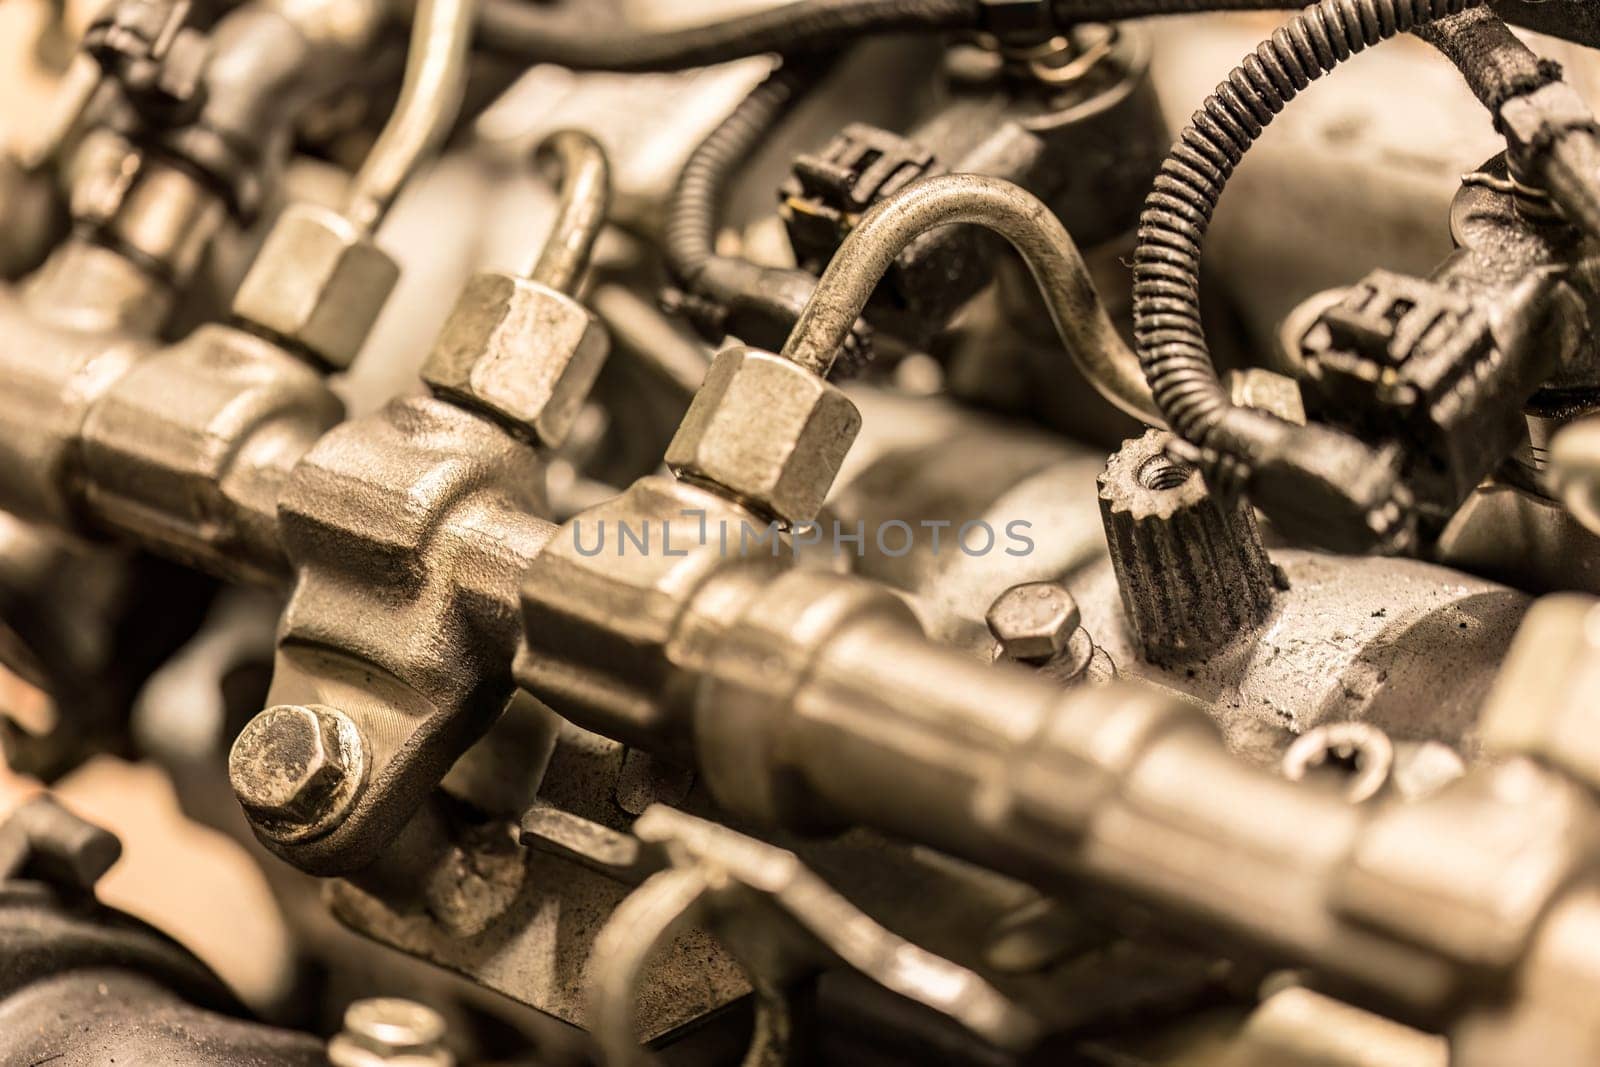 Rome, Italy 17 january 2024: Close-up photo of common rail diesel injectors, highlighting the intricate components of fuel injection.